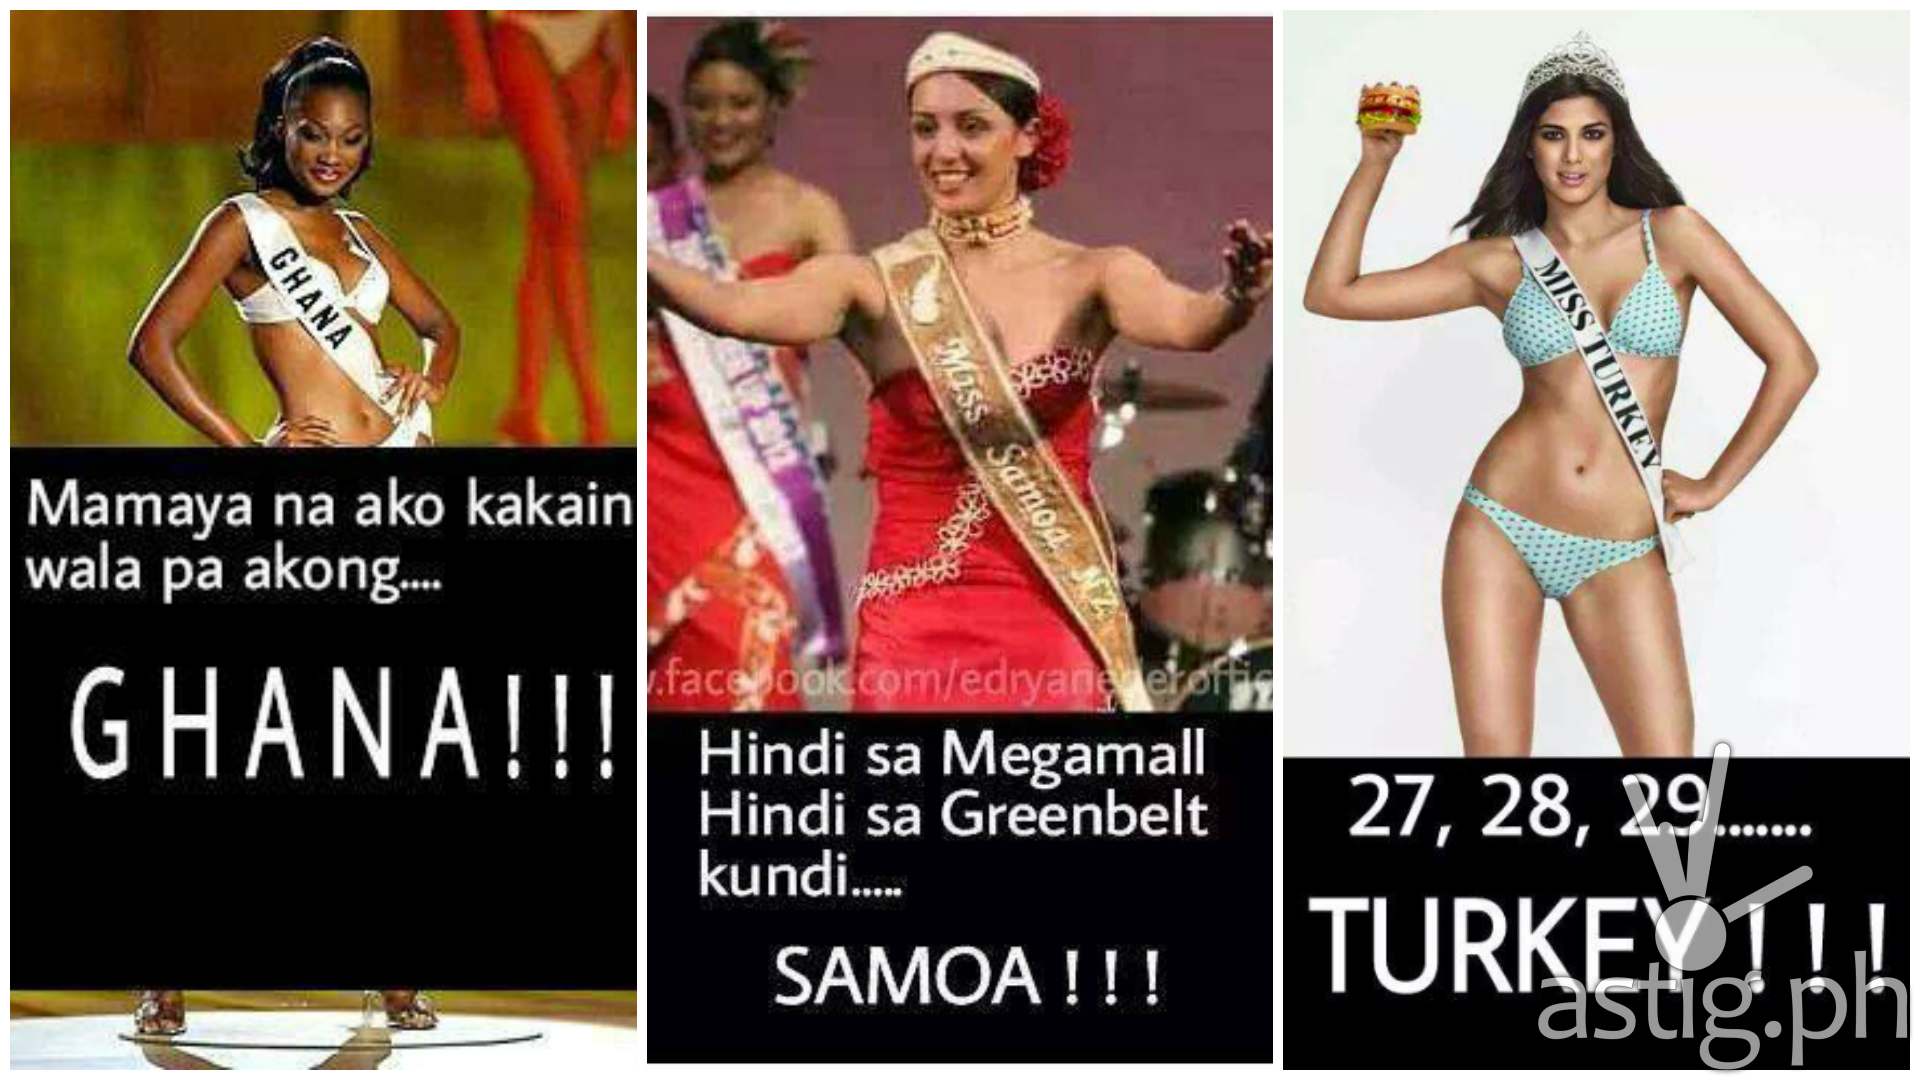 15 Witty Beauty Pageant Memes That Will Make You Laugh Astig Ph